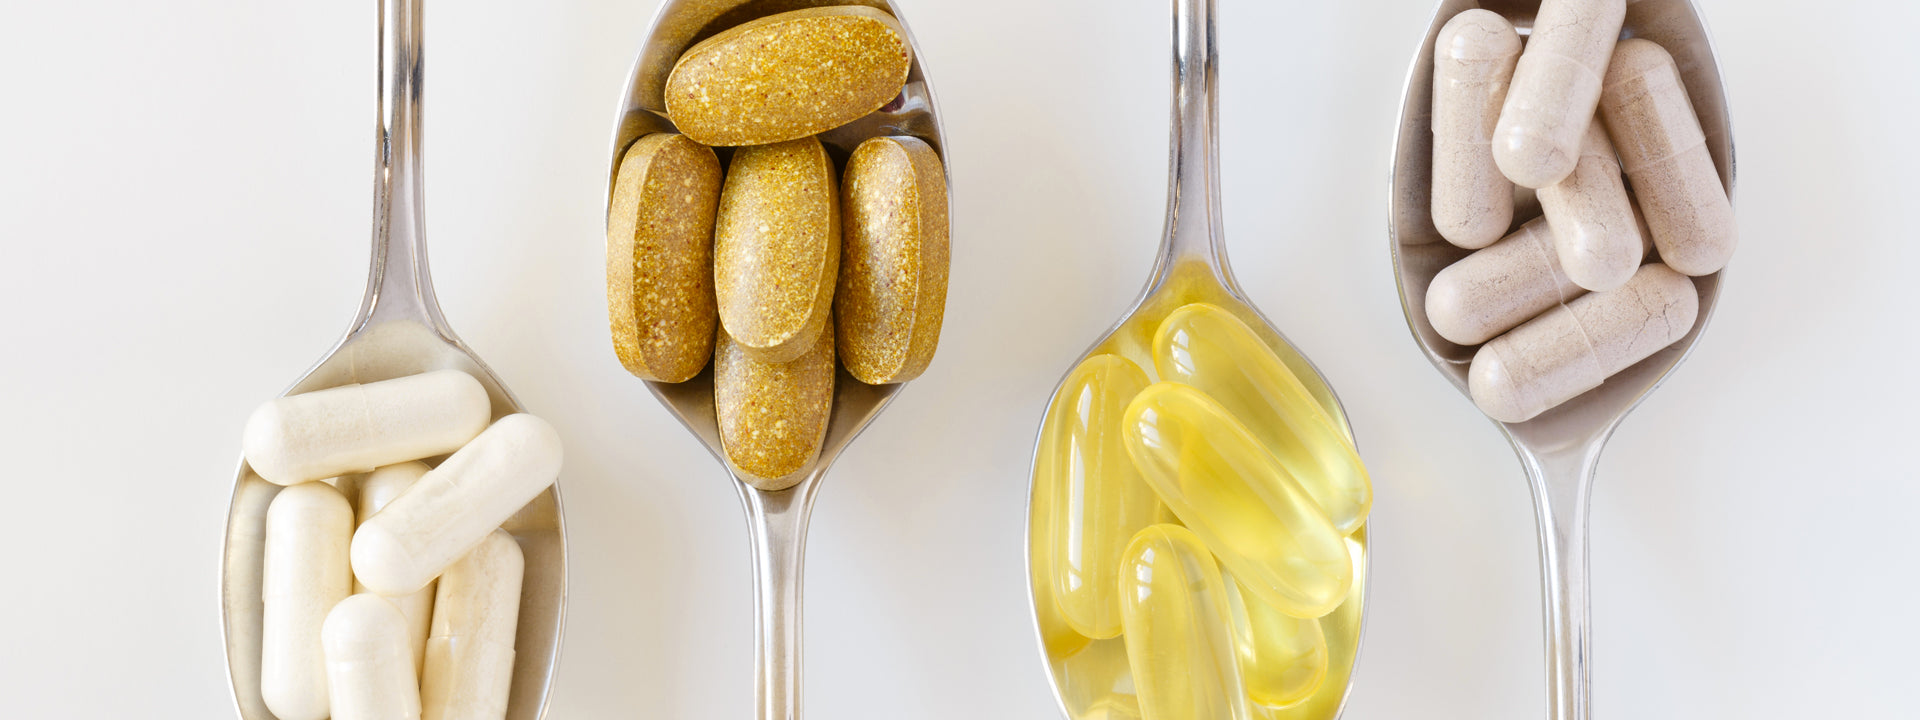 Why Do Supplements Cause Urine to Turn Bright Yellow?